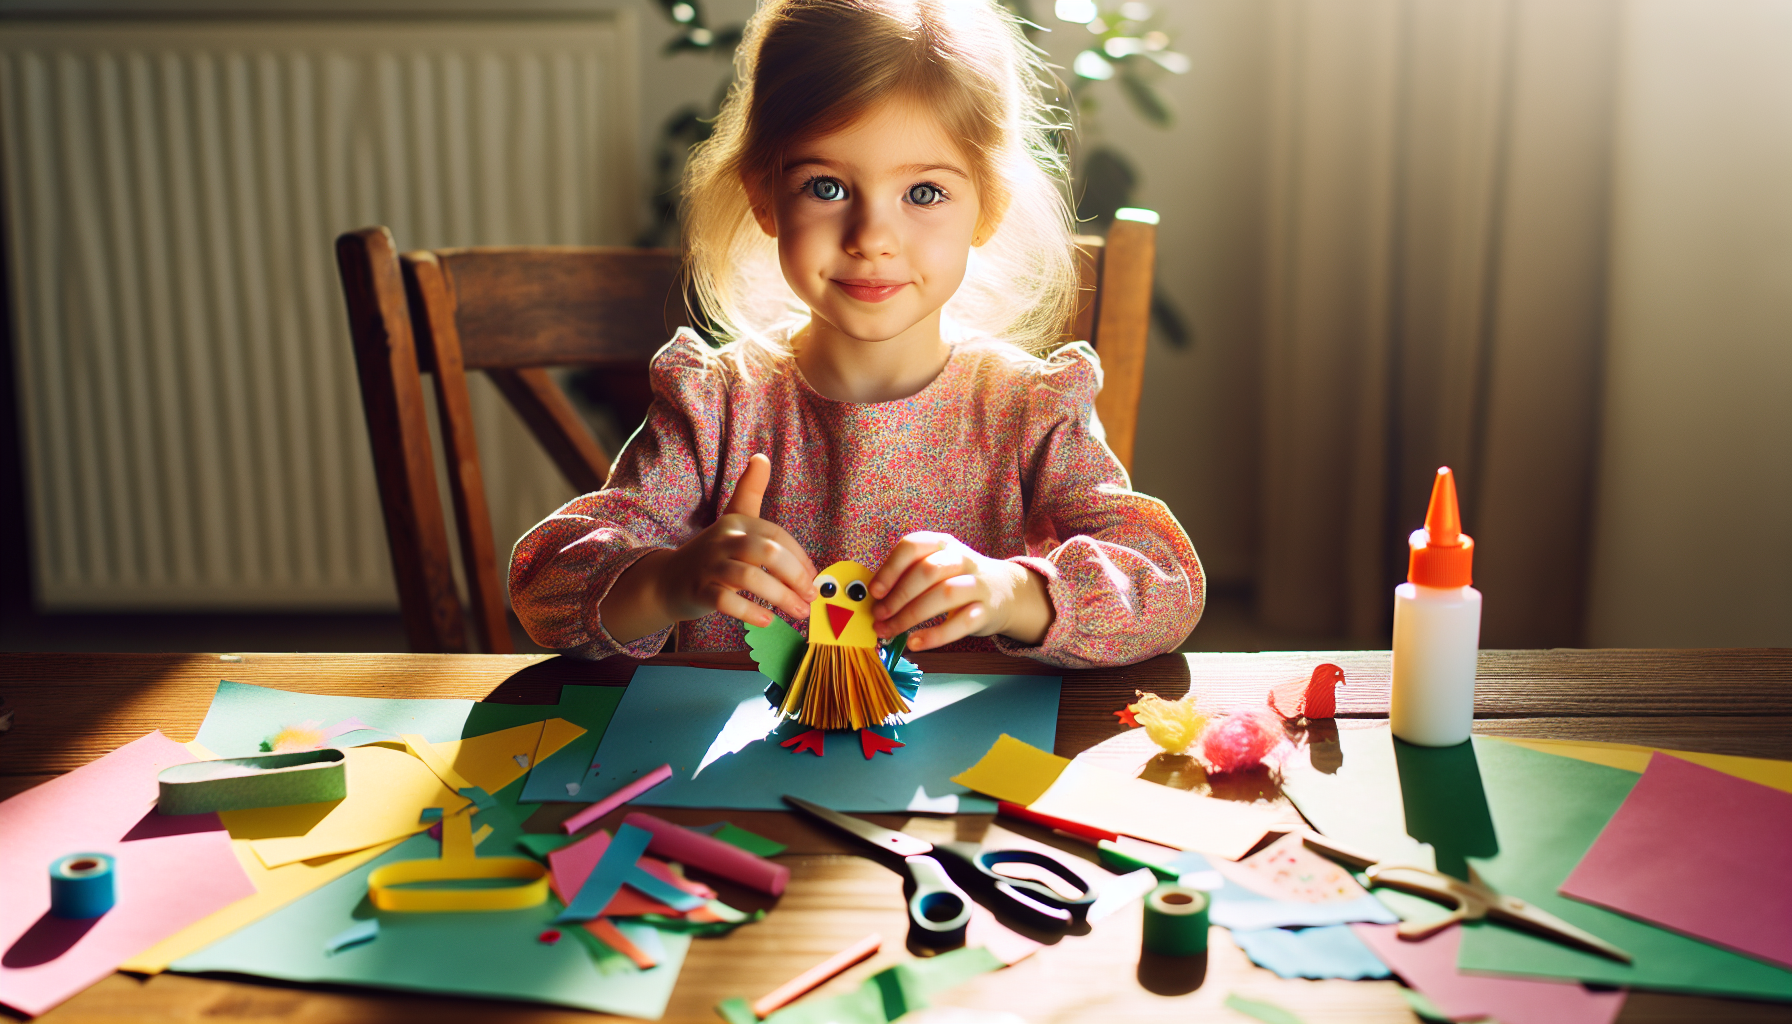 Child creating crafts with paper and glue